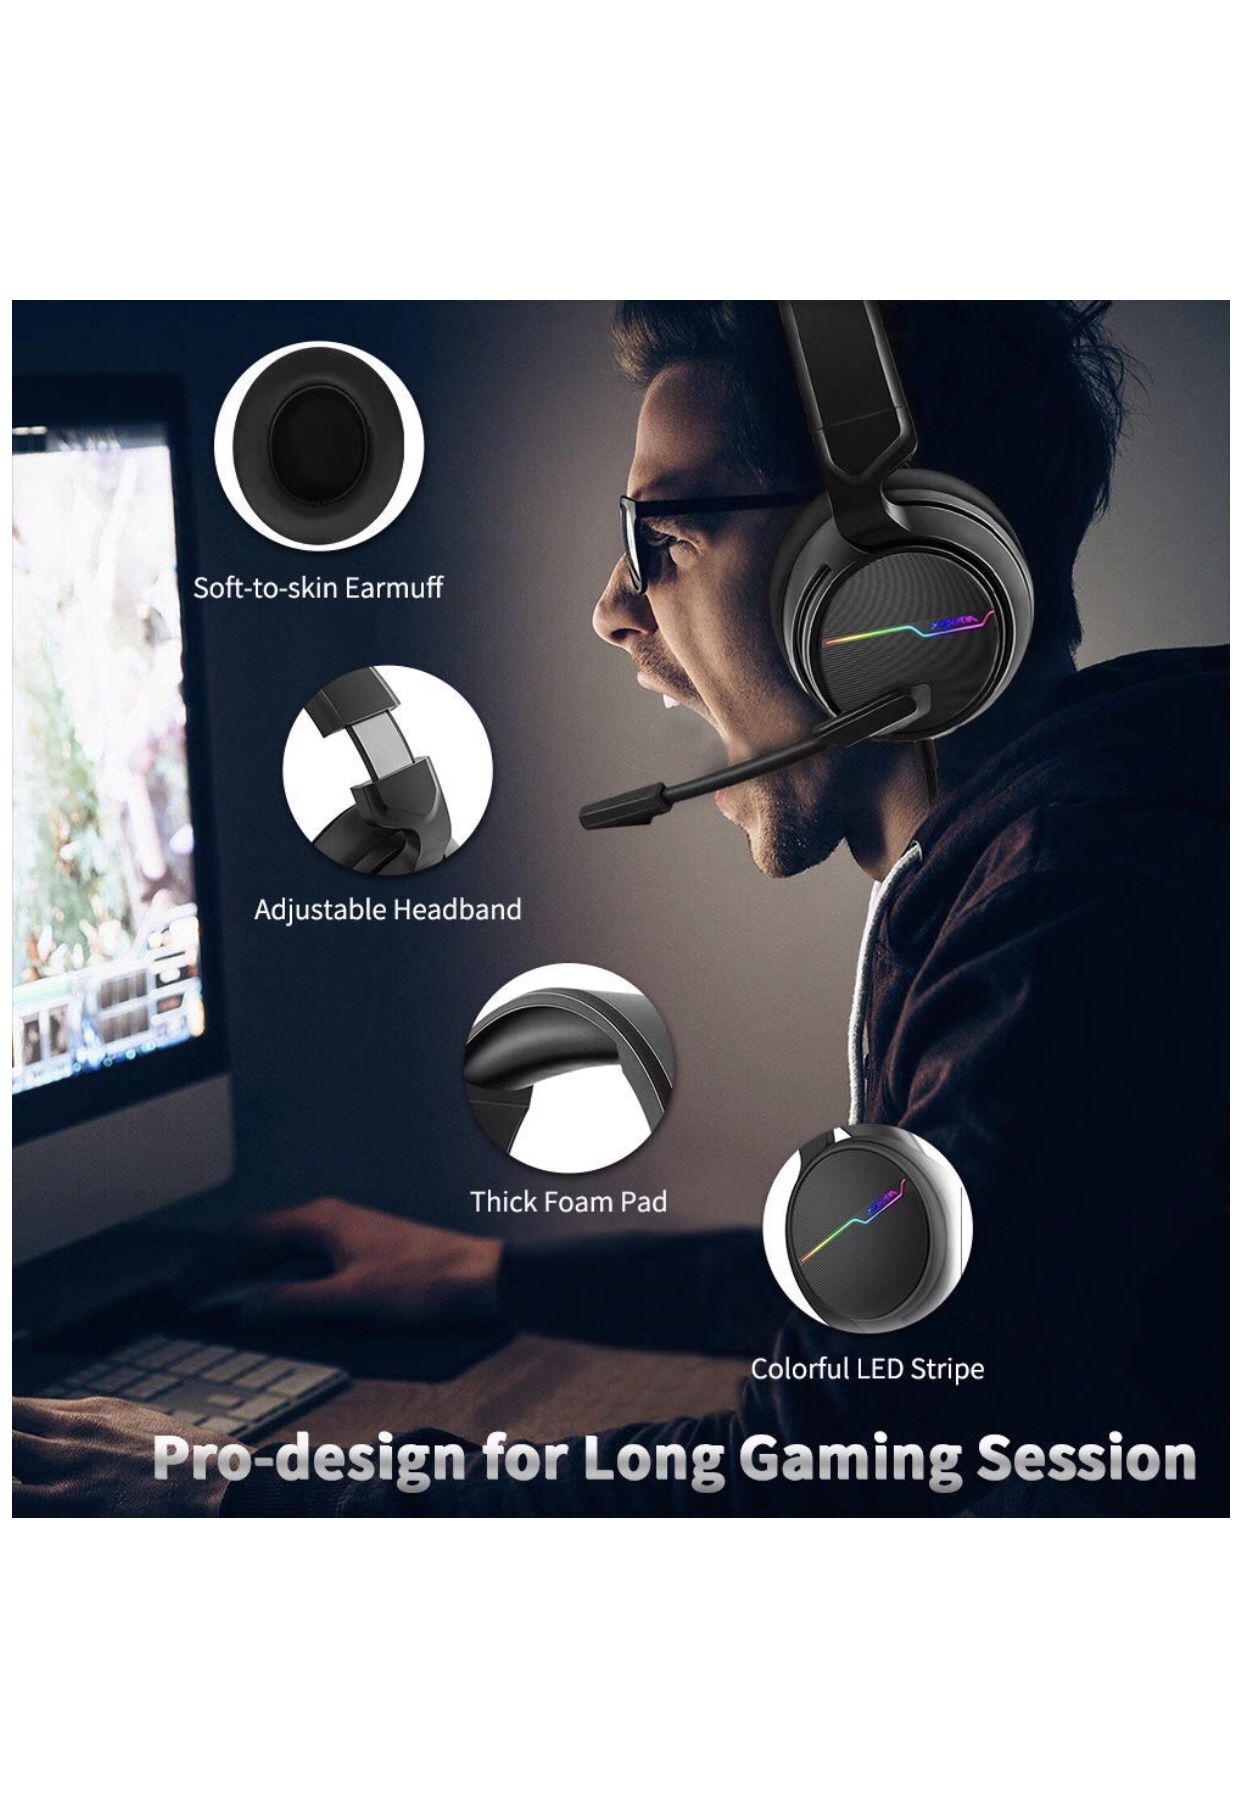 Gaming Headset for PS4, Xbox One S - Noise Cancelling Over Ear Headphones with Microphone